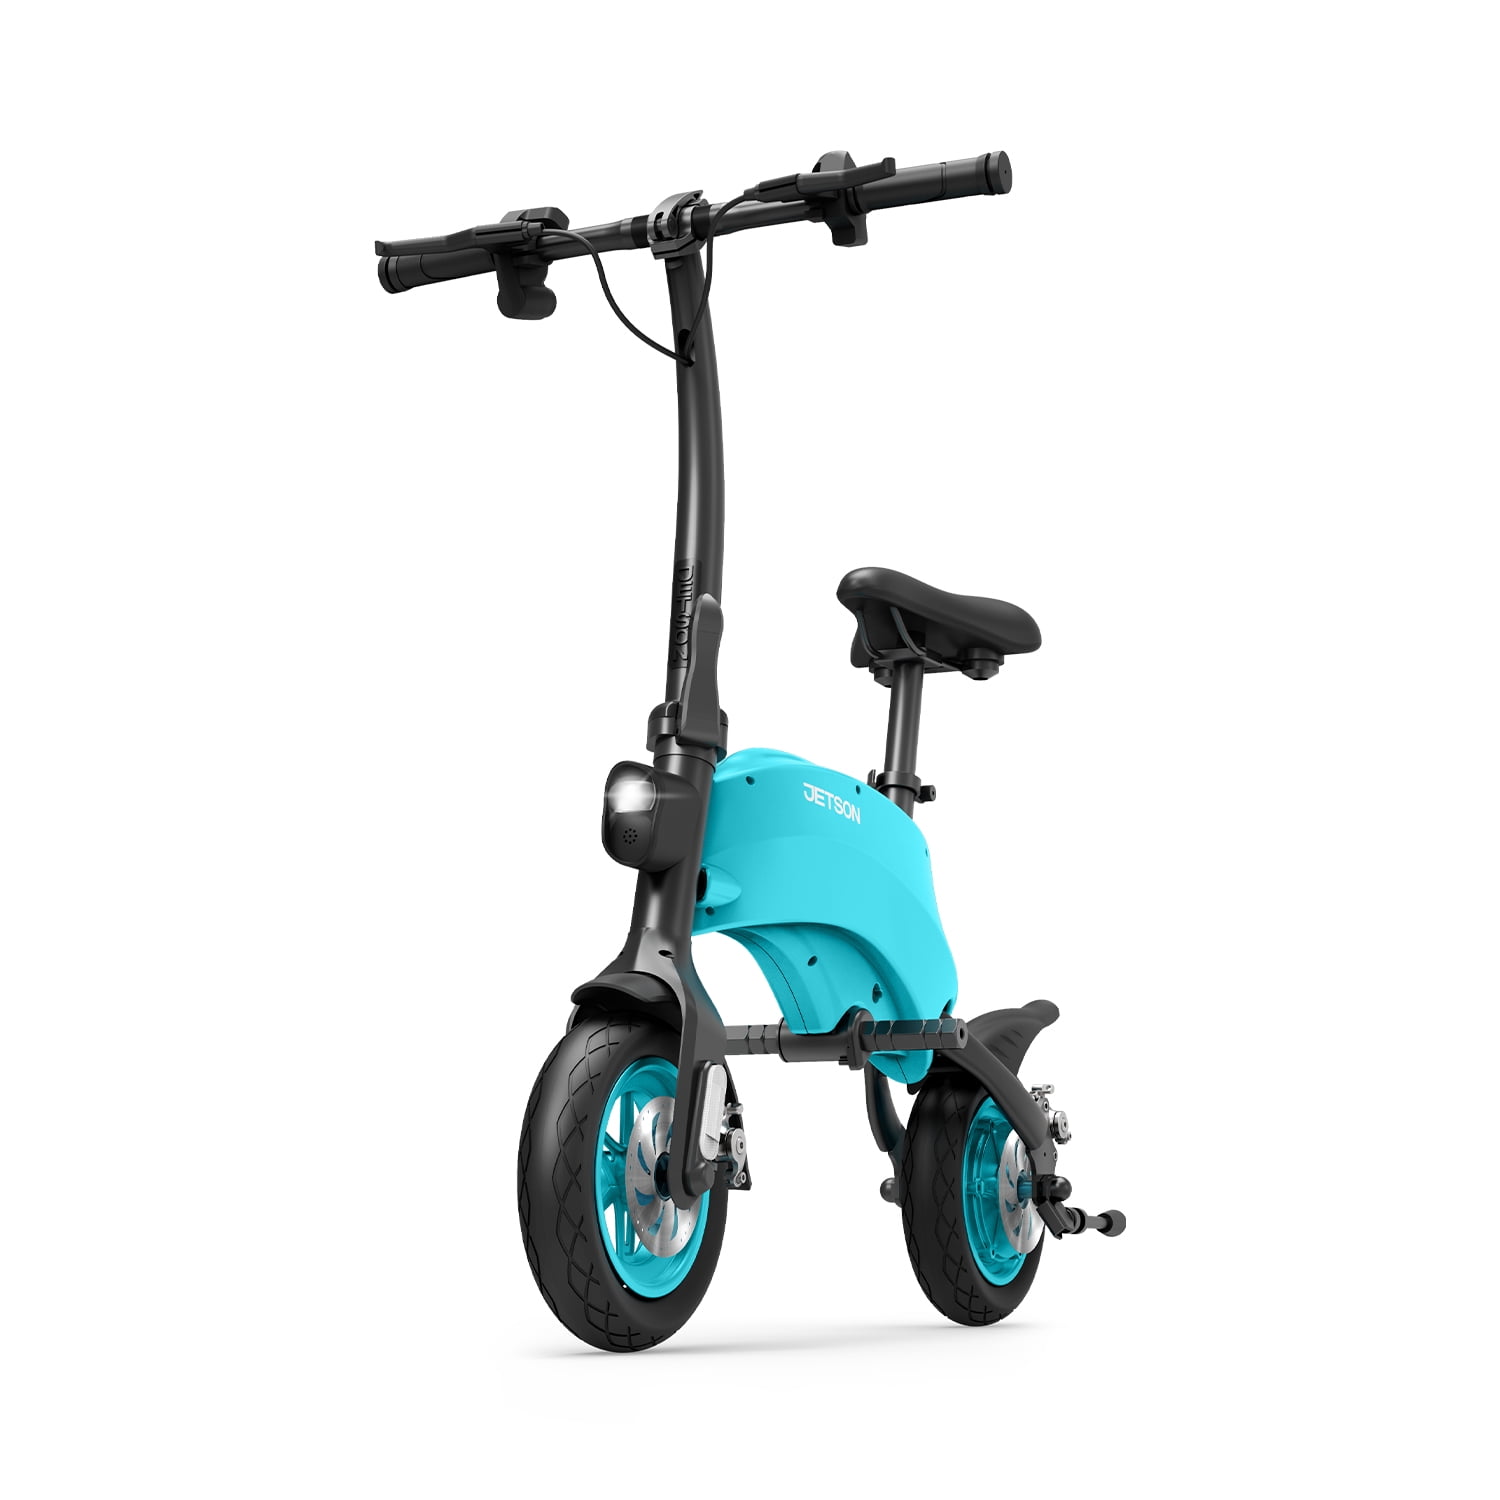 kød gerningsmanden Arkæolog Jetson LX10 Electric Bicycle Ride On, 260 Lb. Weight Limit, Ages 12+, Red,  10 In., Wheel, 250-Watt Motor, Foldable, Head Light, Twist Throttle, Hand  Brake, Top Speed: 15.5 MPH and 4 Hour Charge Time - Walmart.com